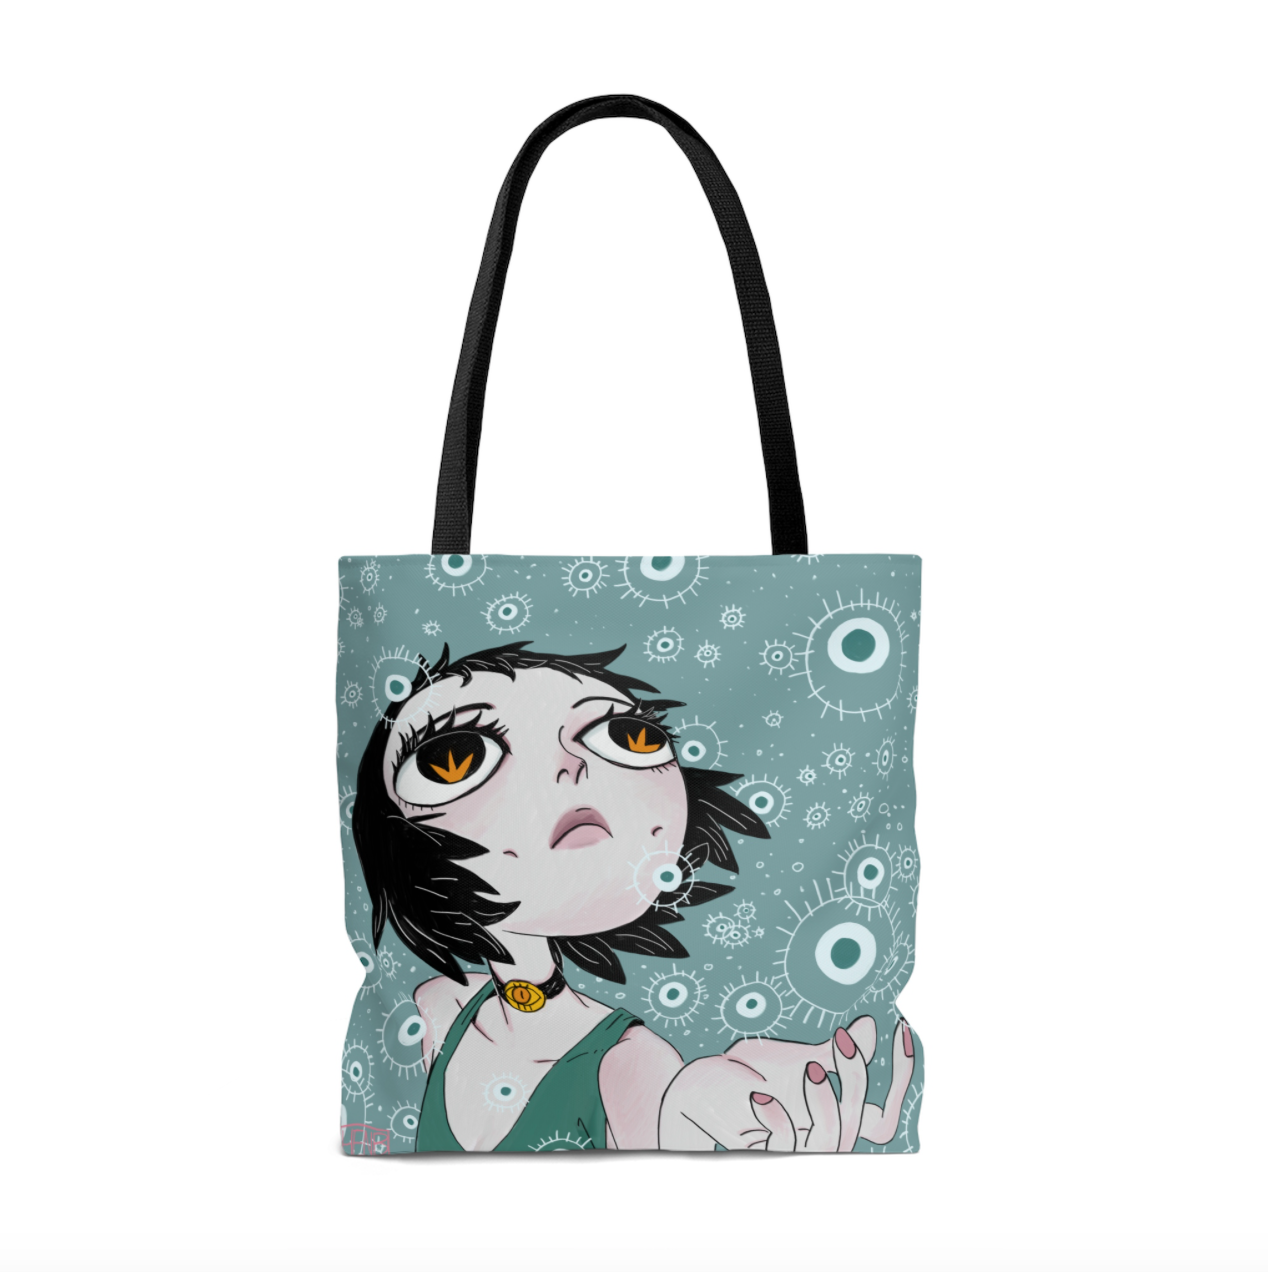 HENBUHAO Tote